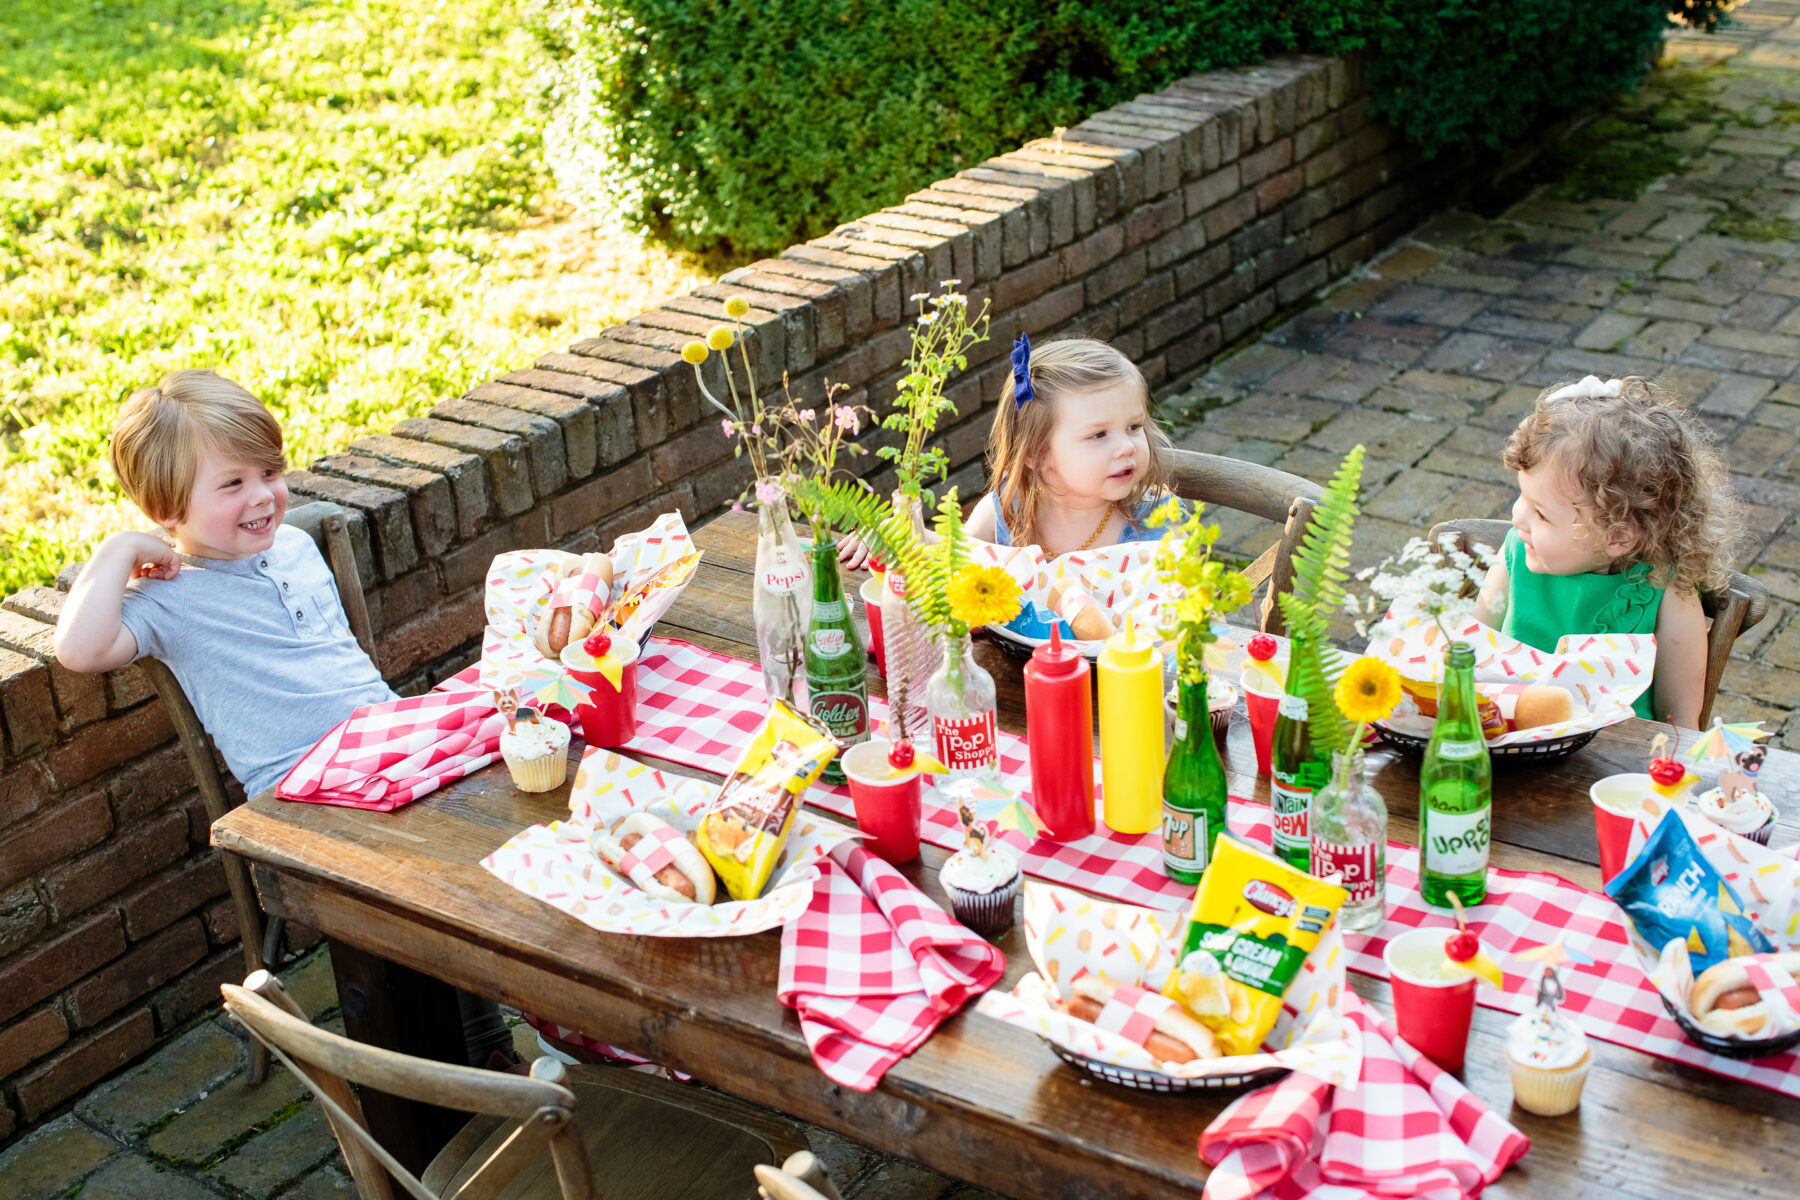 Father's Day Backyard Party Ideas from Southern Events featured on Nashville Baby Guide